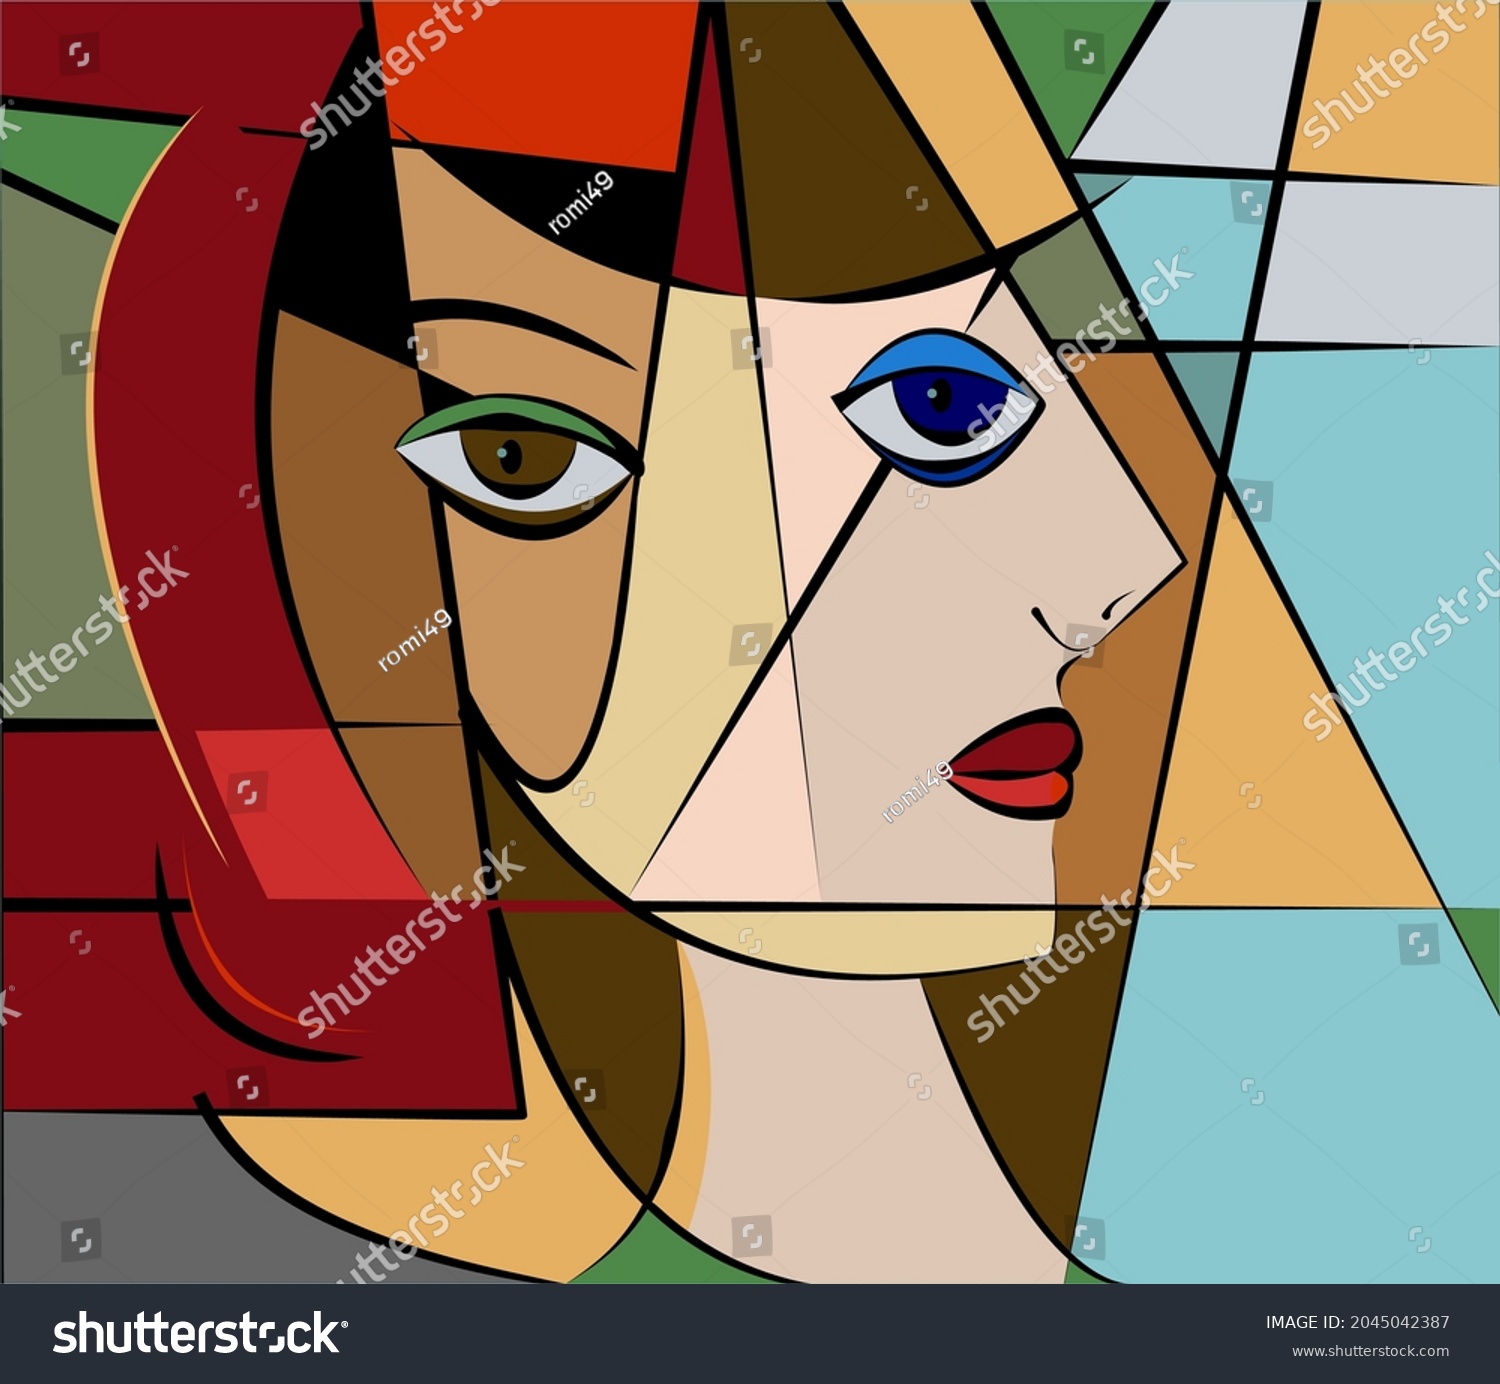 Colorful Background Cubism Art Styleabstract Portrait Stock Vector ...